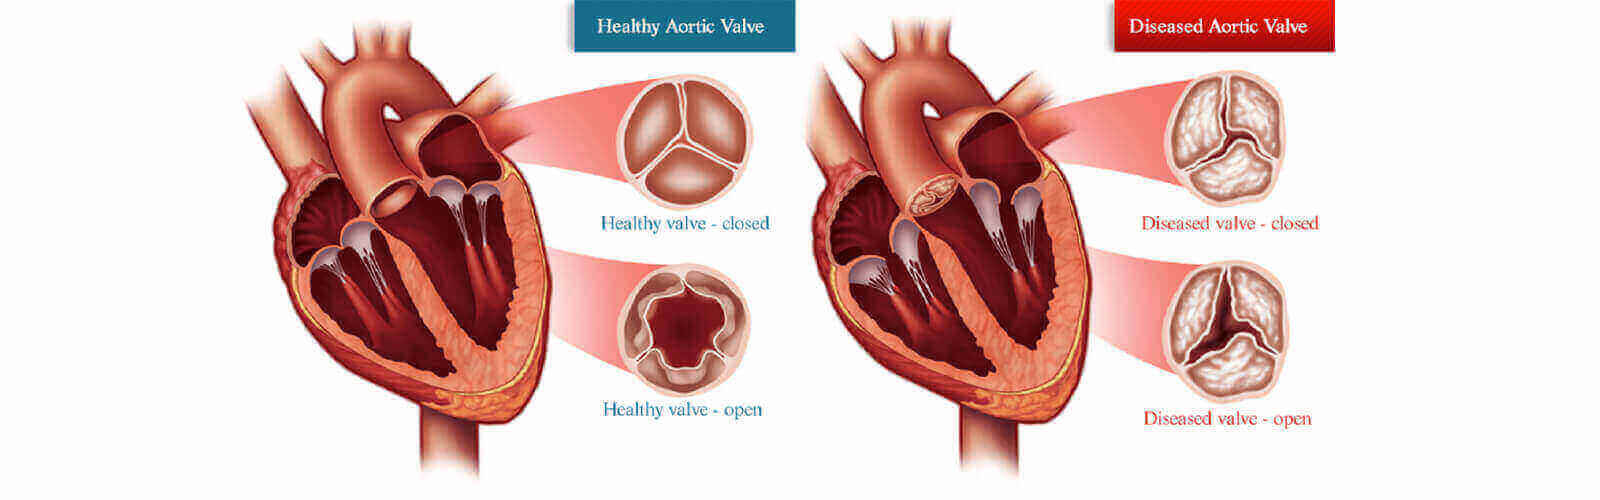 Heart Valve Replacement Surgery in Pakistan